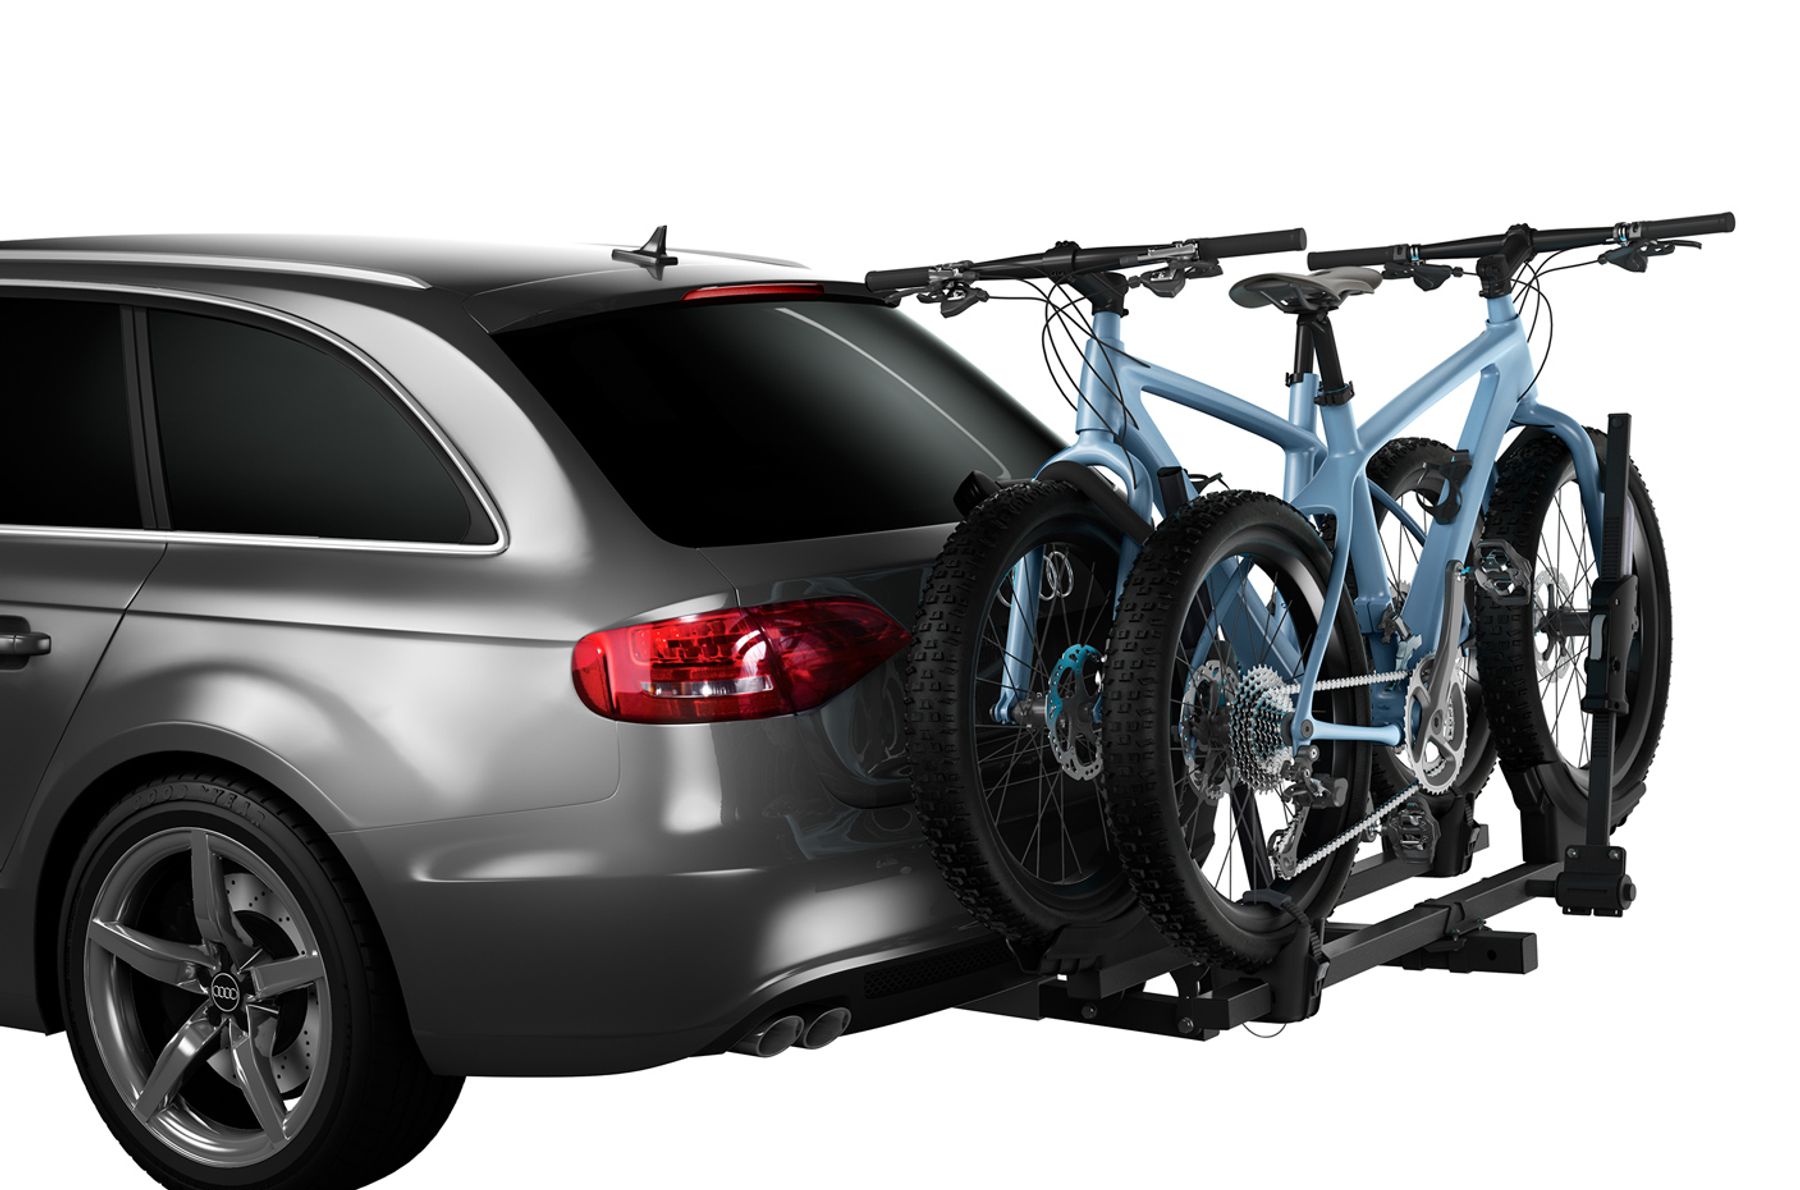 Bike carrier Thule T2 Classic 9044 tilted on a car